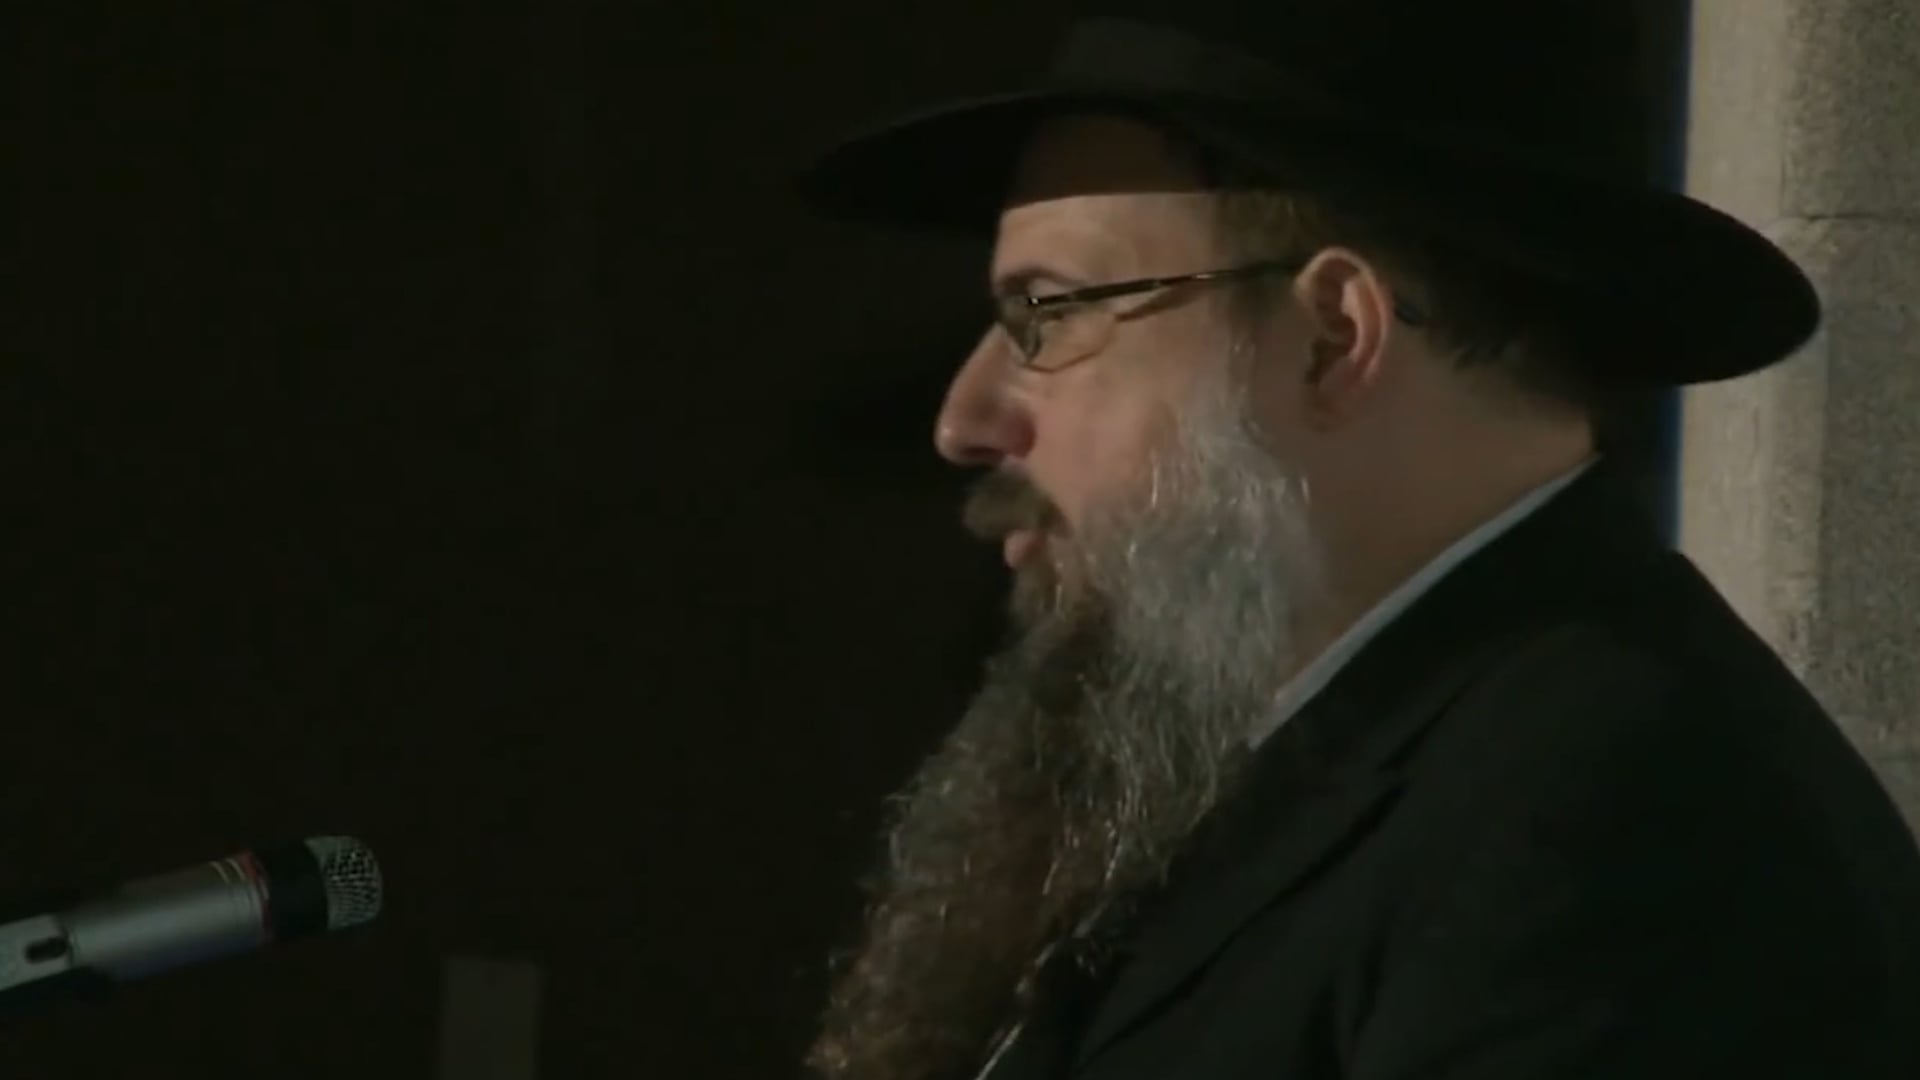 Sicha of the Rebbe and Introduction to Michel Zlotchevers niggun